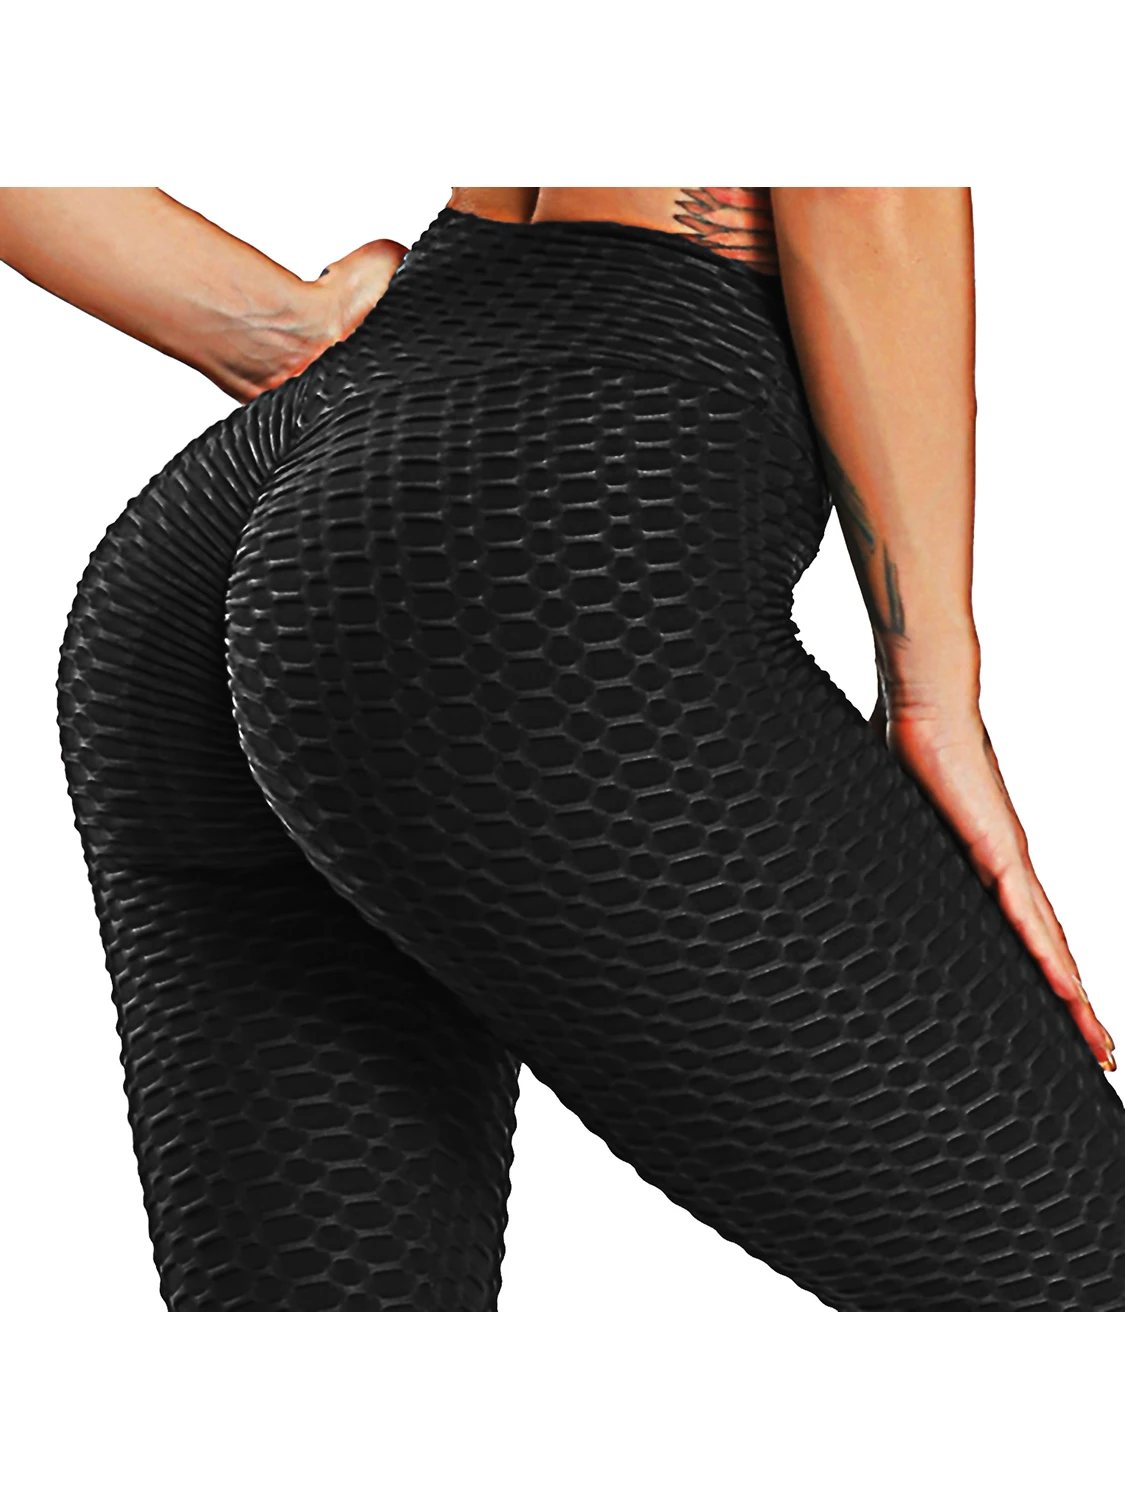 Scrunch Back Fitness Leggings Hips Up Booty Workout Pants Womens Gym Activewear For Fitness High Waist Long Pant Leggins Mujer 20